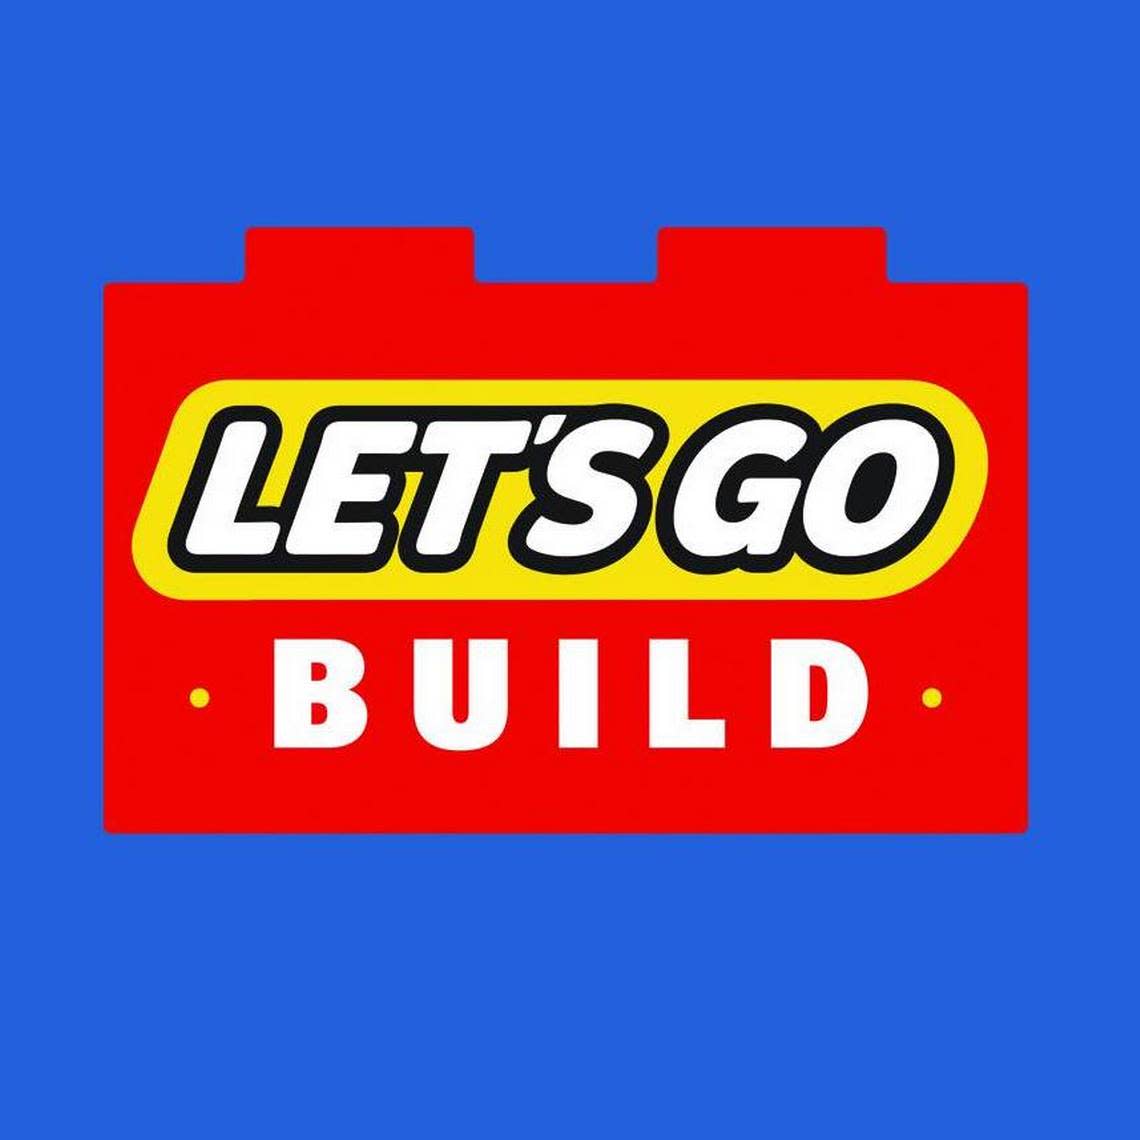 Let’s Go Build will feature random Legos for sale as well as new kits.